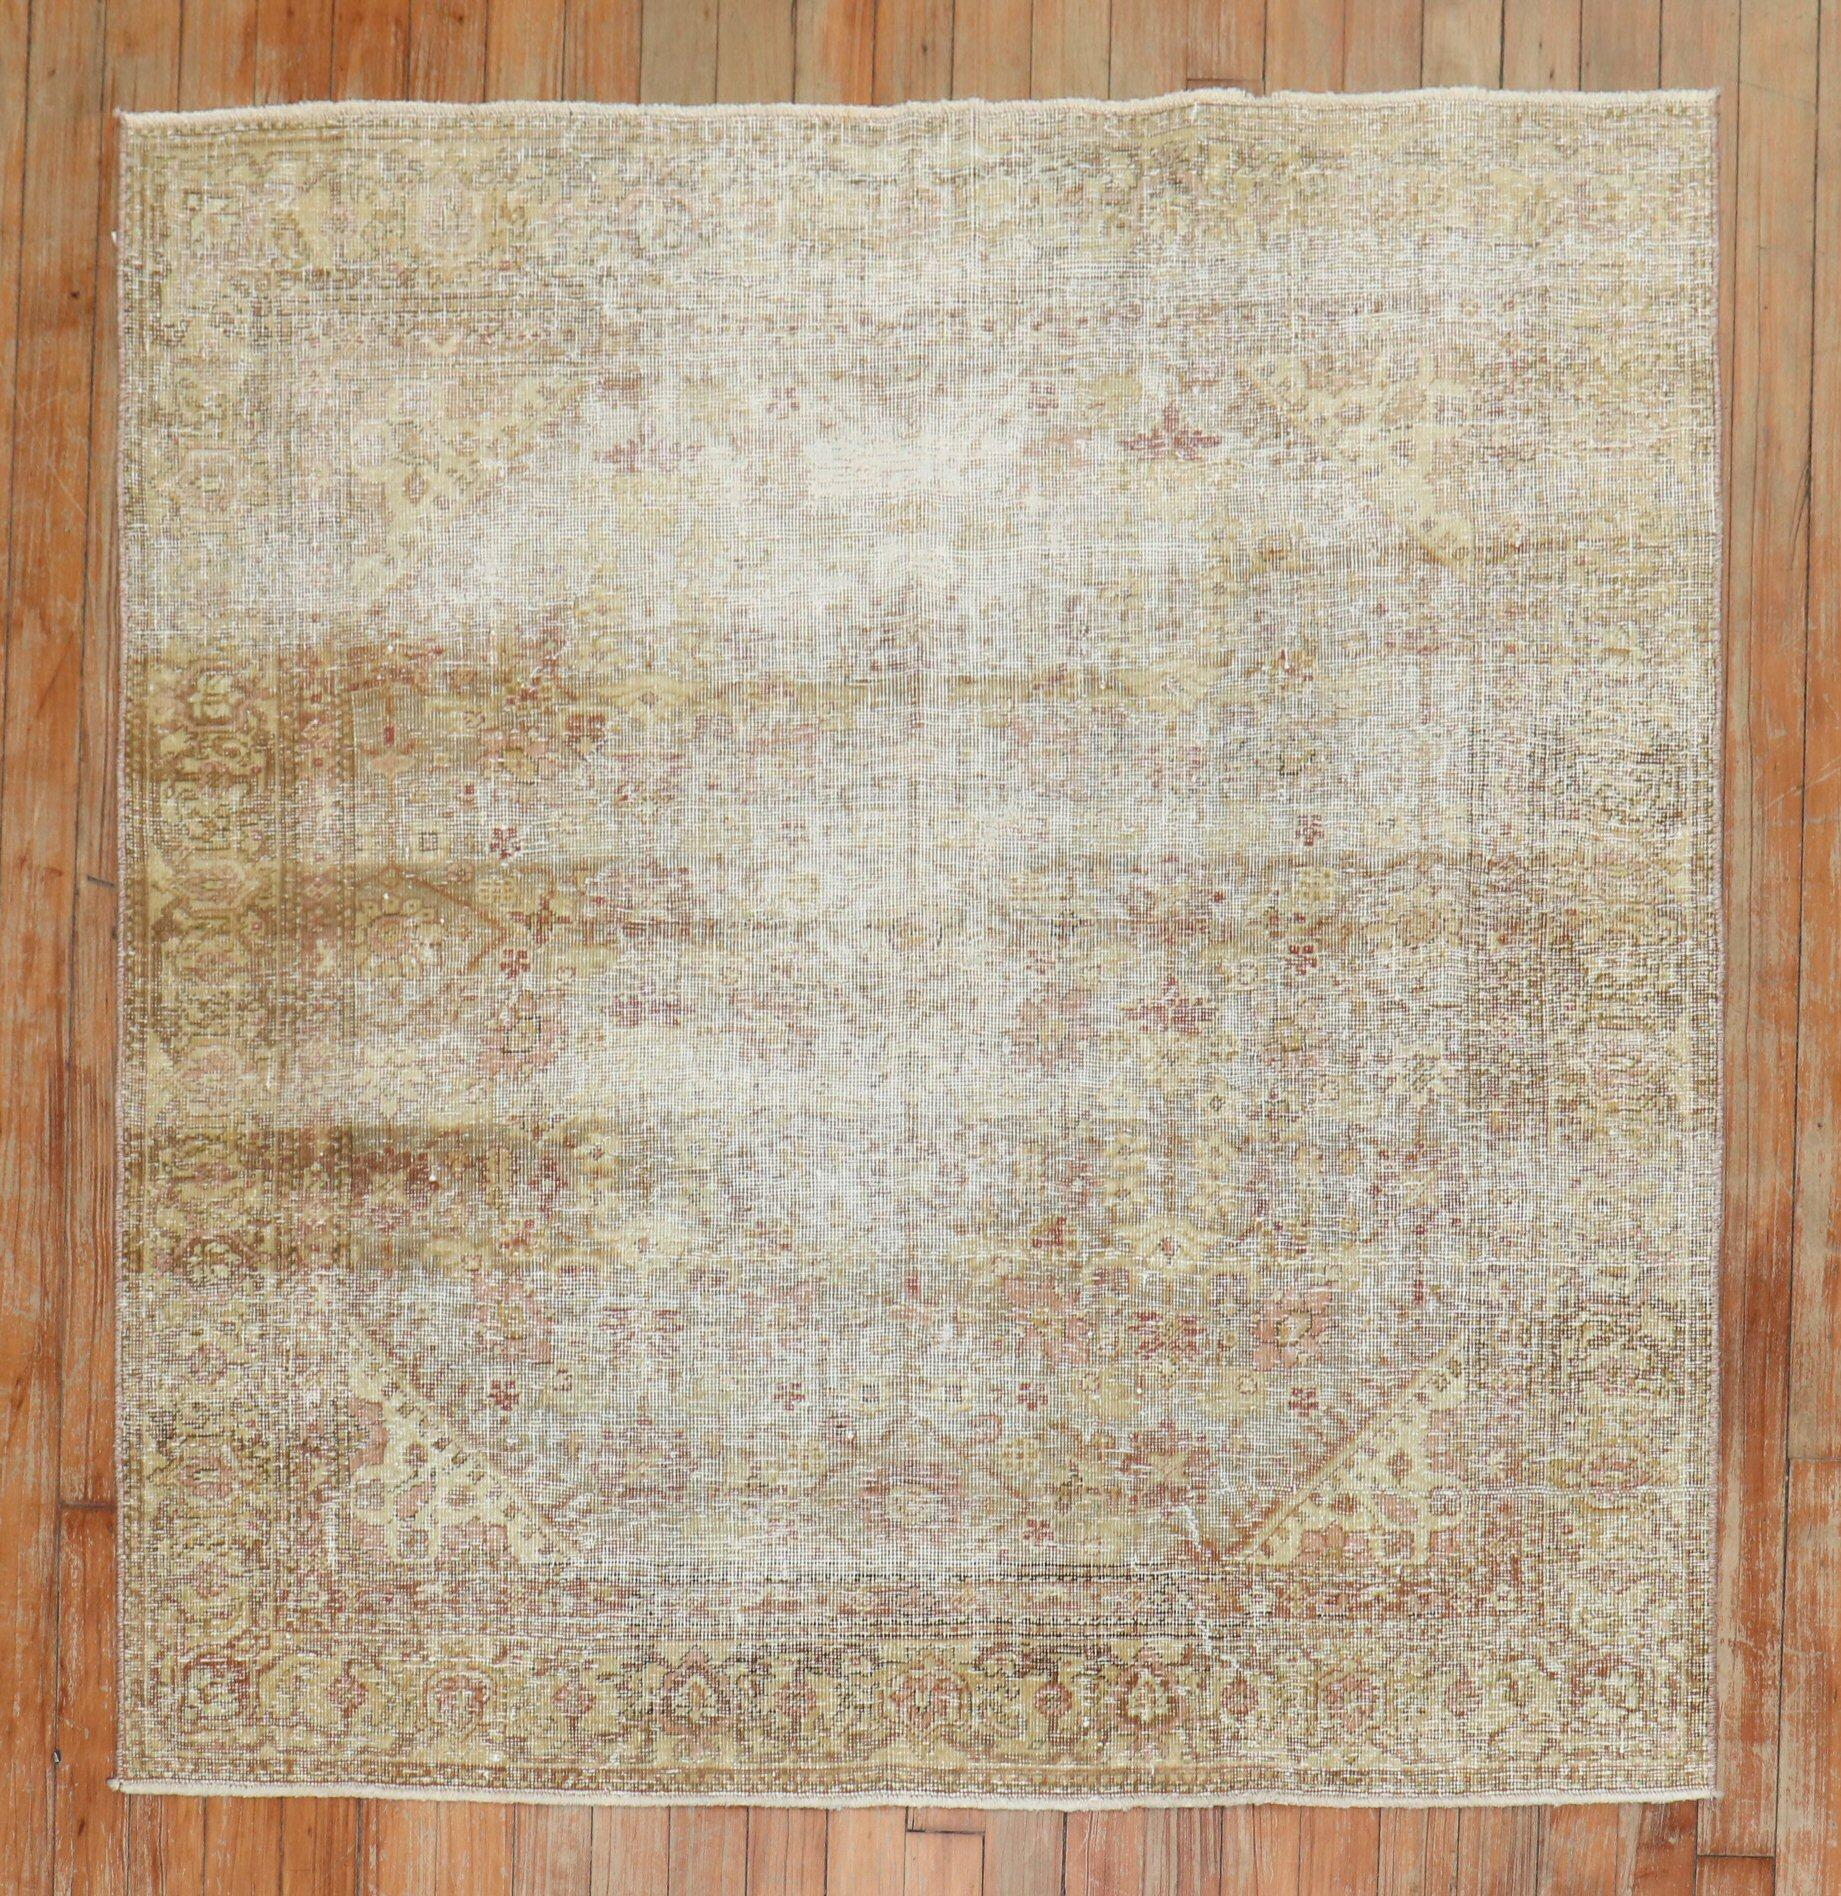 Near 4-foot square distressed early 20th century North Indian rug

Measures: 3'10' x 3'11''.